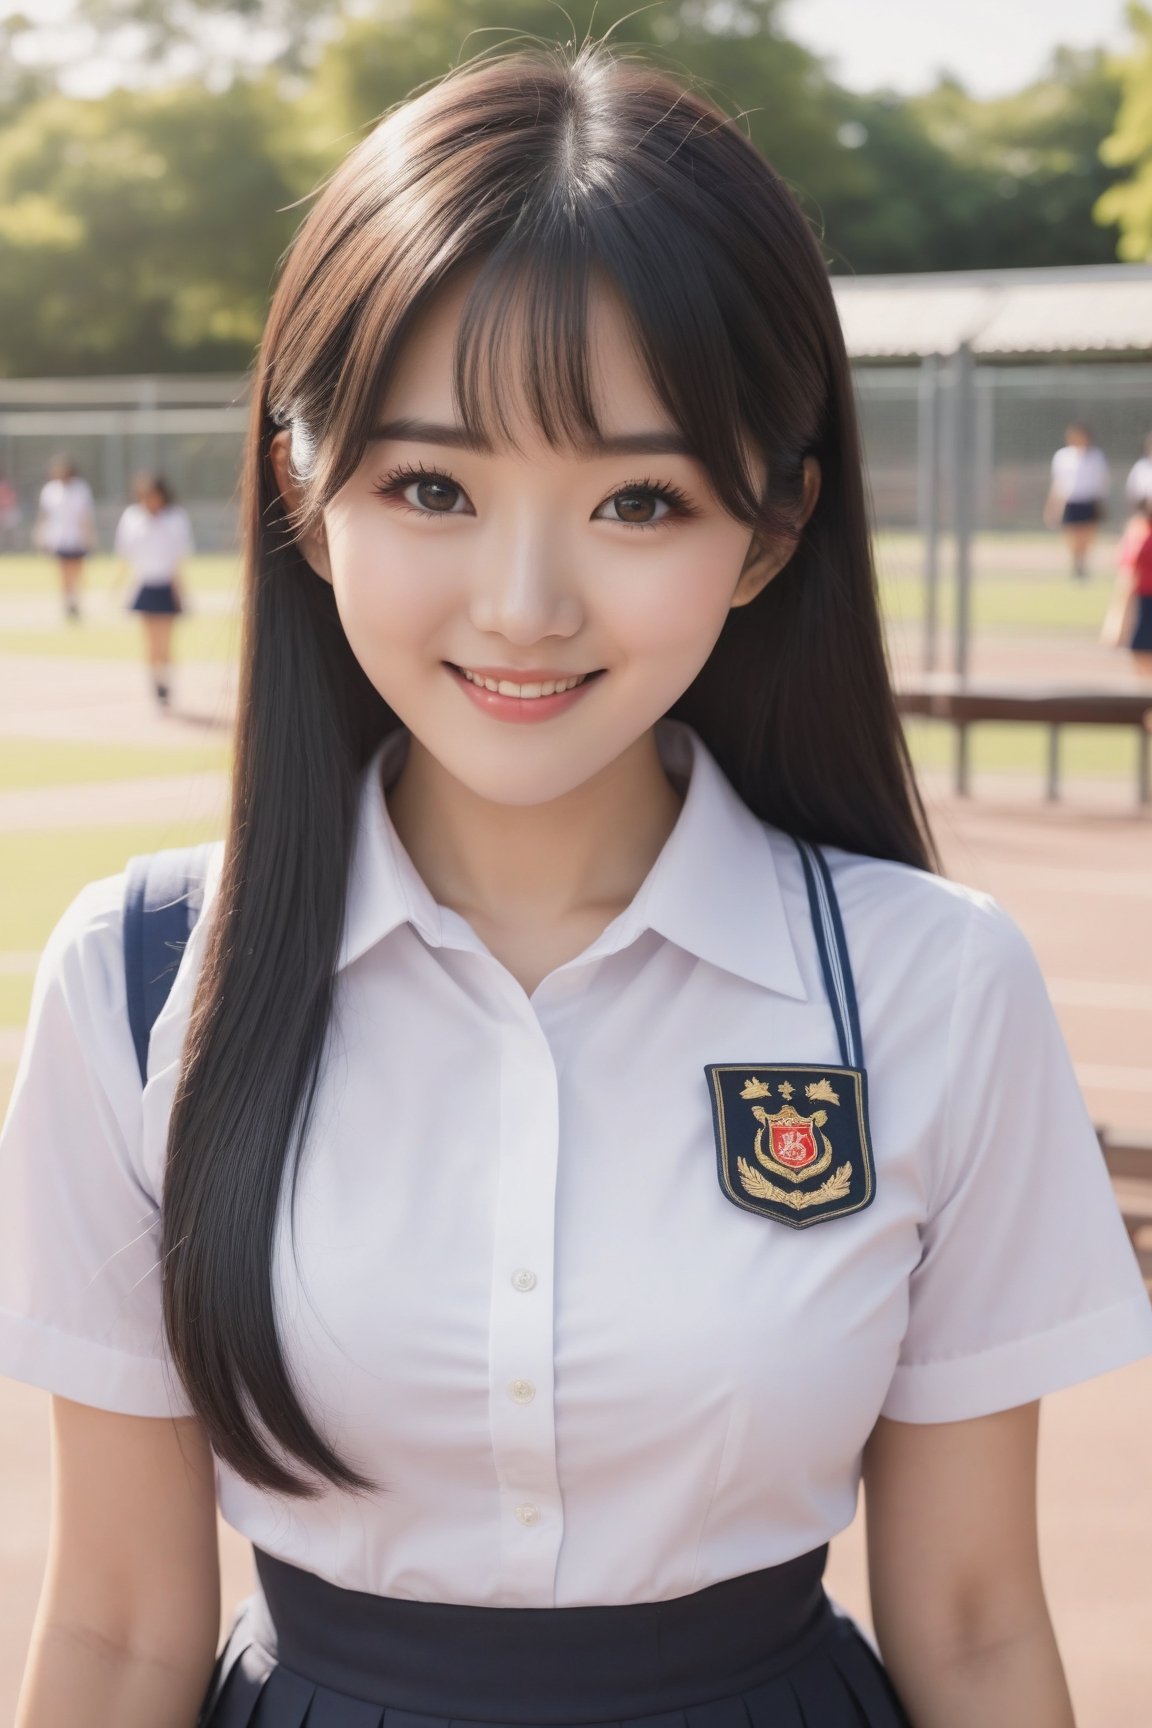 Shot on iPhone 15
natural lighting
Clear and sharp focus
long black hair
smiling
black eyes long eyelashes
cute asian girl
(Masterpiece: 1.3)
(Best quality: 1.3)
(Super detailed: 1.3)
ultra high definition
((Extremely exquisite and beautiful))
(((full-body shot)))
Breast size: D cup
student uniform
Selfie on school playground
pleated skirt
wide angle